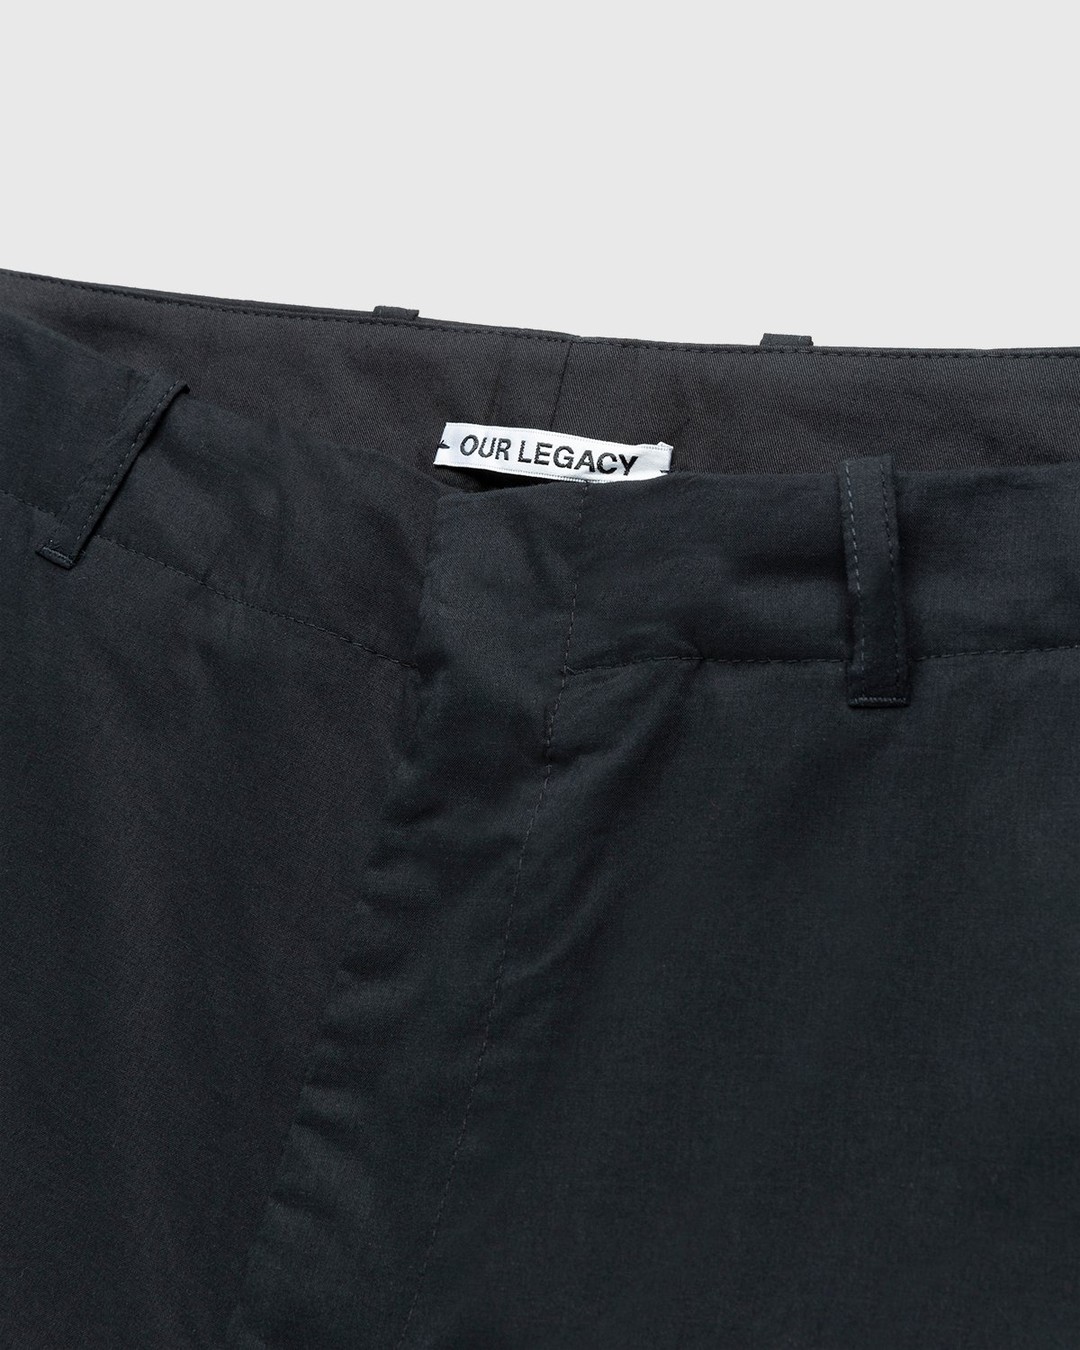 Our Legacy – Borrowed Chino Black Voile - Chinos - Black - Image 3